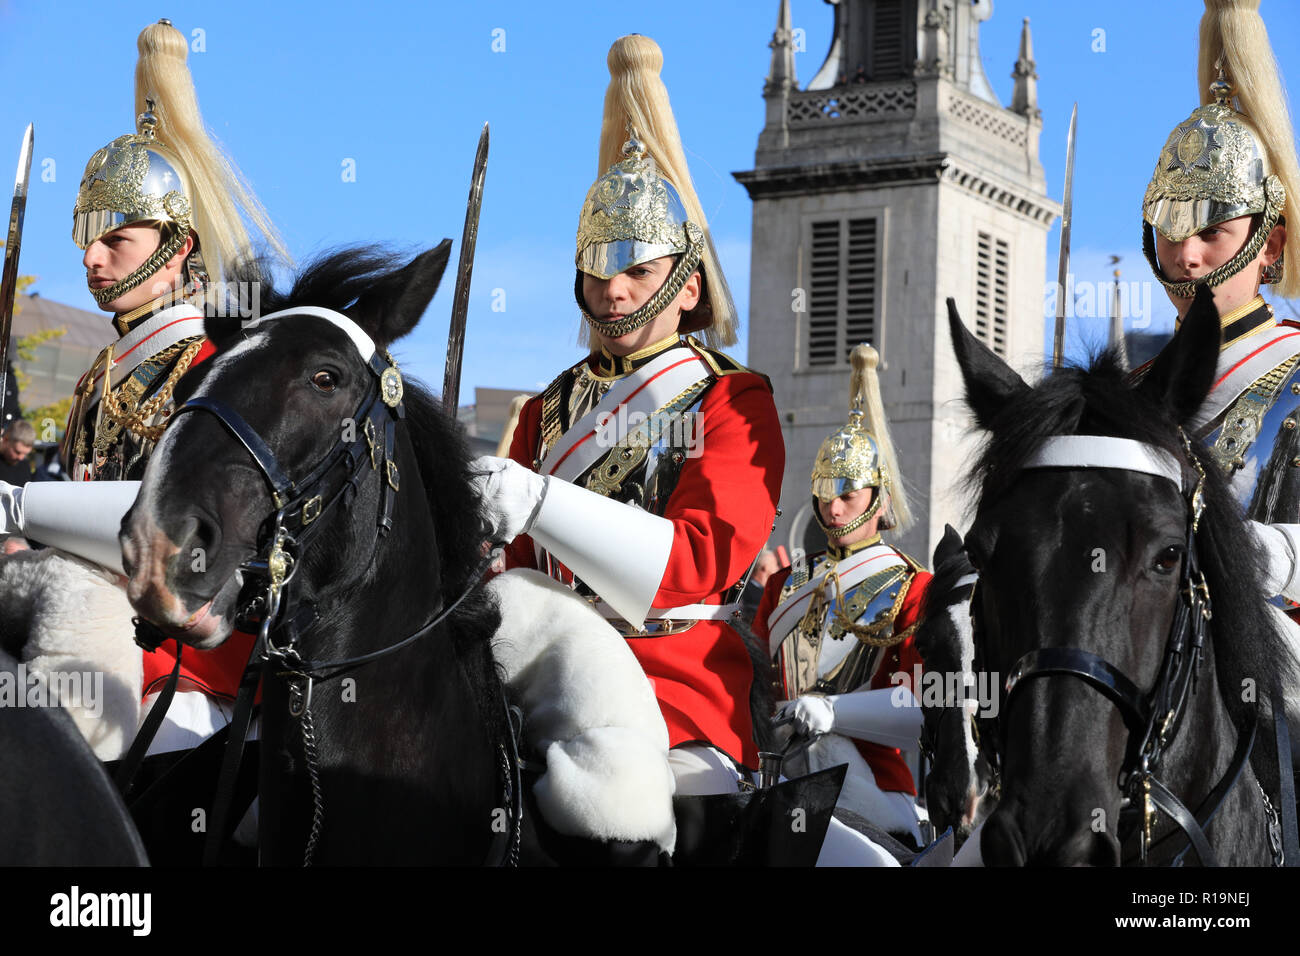 St Paul's Cathedral, London, UK. 10th Nov, 2018. The King's Troops Royal Horse Atillery. The 2018 Lord Mayor's Show is under way with pomp and pageantry. The three-mile-long procession brings together over 7,000 people, 200 horses, and 140 motor and steam-driven vehicles, as well as military bands and many other participants. Credit: Imageplotter News and Sports/Alamy Live News Stock Photo